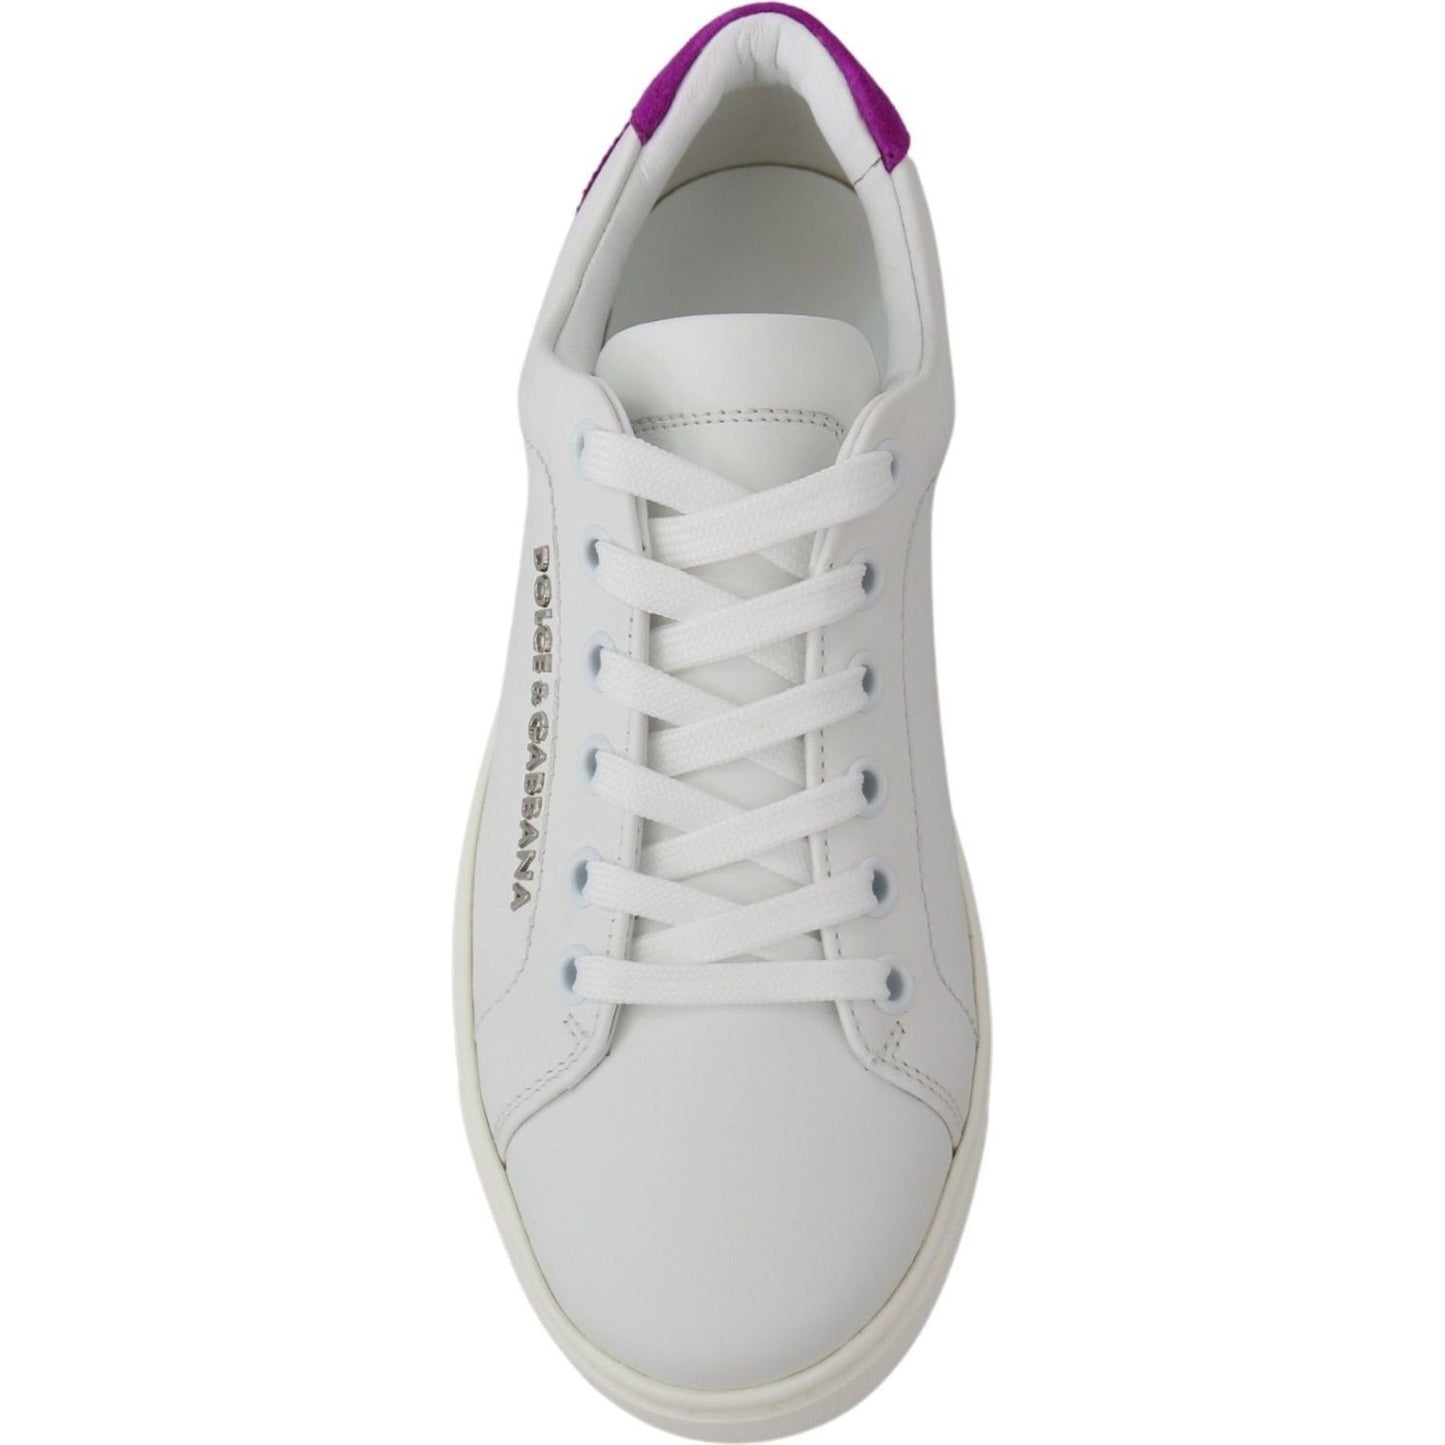 Dolce & Gabbana Chic White Leather Sneakers with Purple Accents WOMAN SNEAKERS white-purple-leather-logo-womens-shoes IMG_9740-0f2ce5d2-5f3.jpg